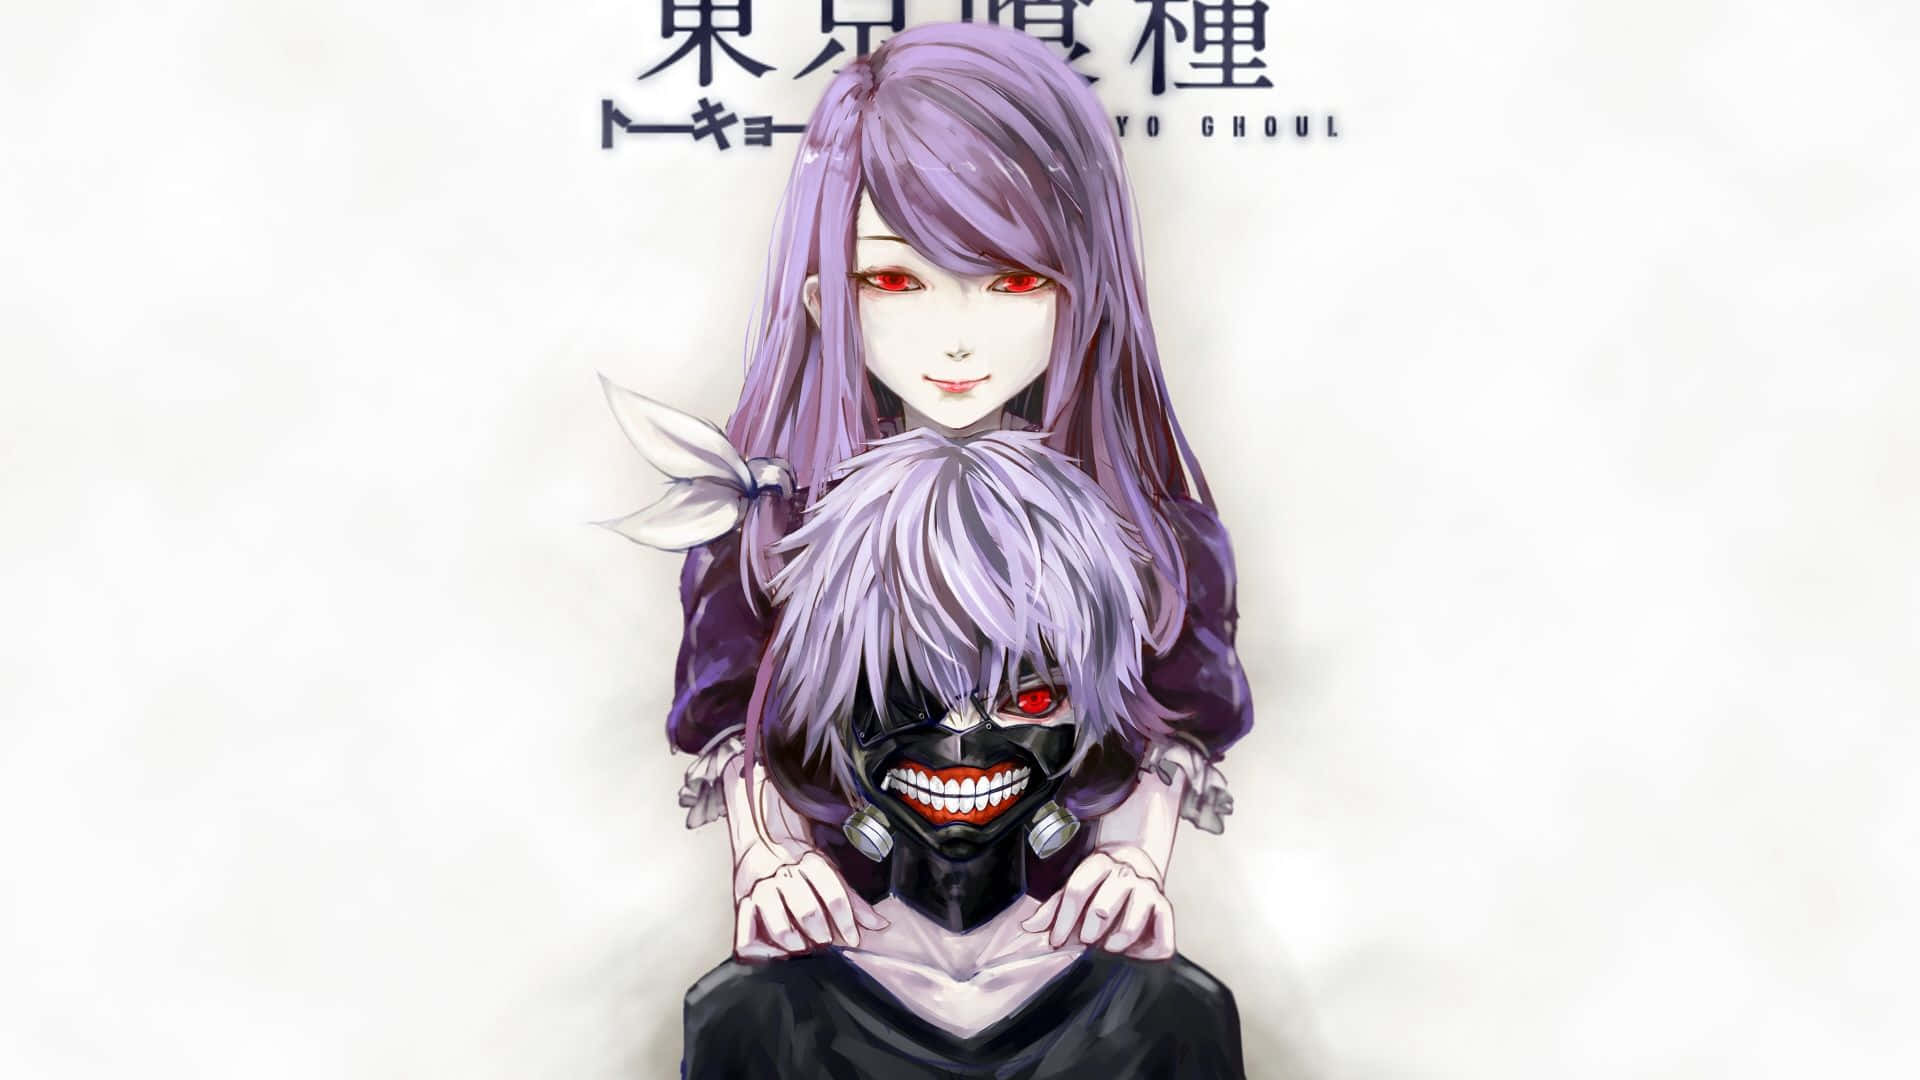 Kanekitraurig Anime Tokyo Ghoul Form Und Rize Wallpaper